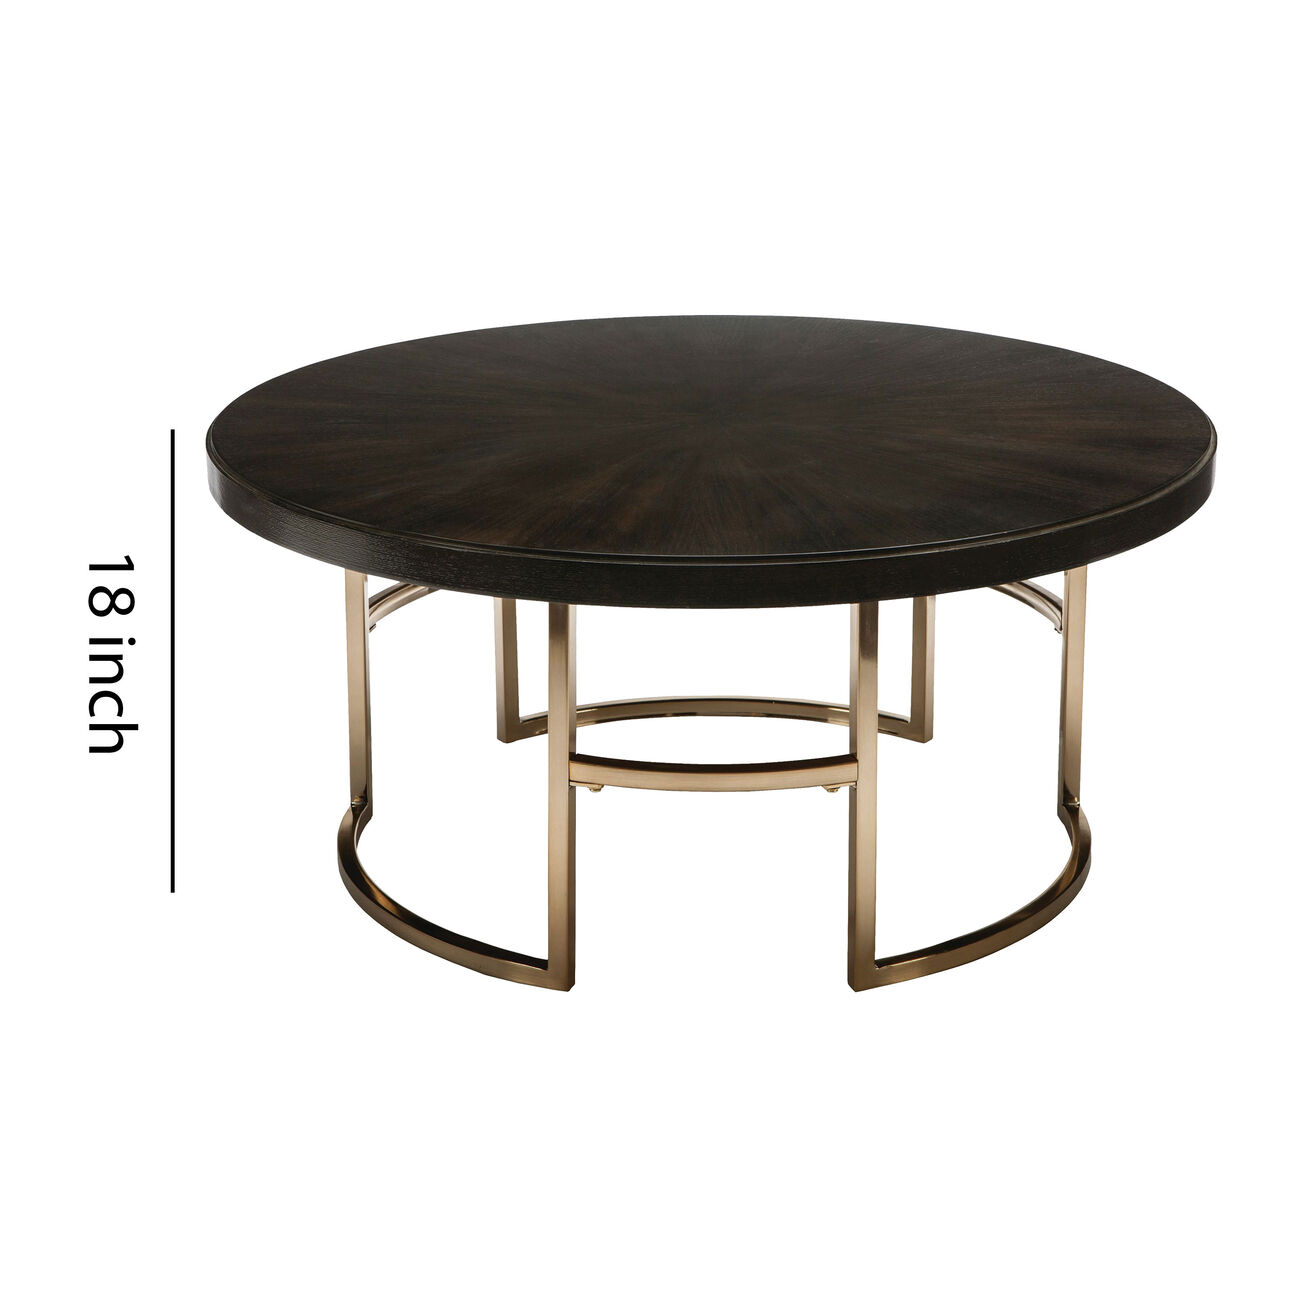 Round Wood Top Coffee Table with U shaped Legs, Brown and Gold